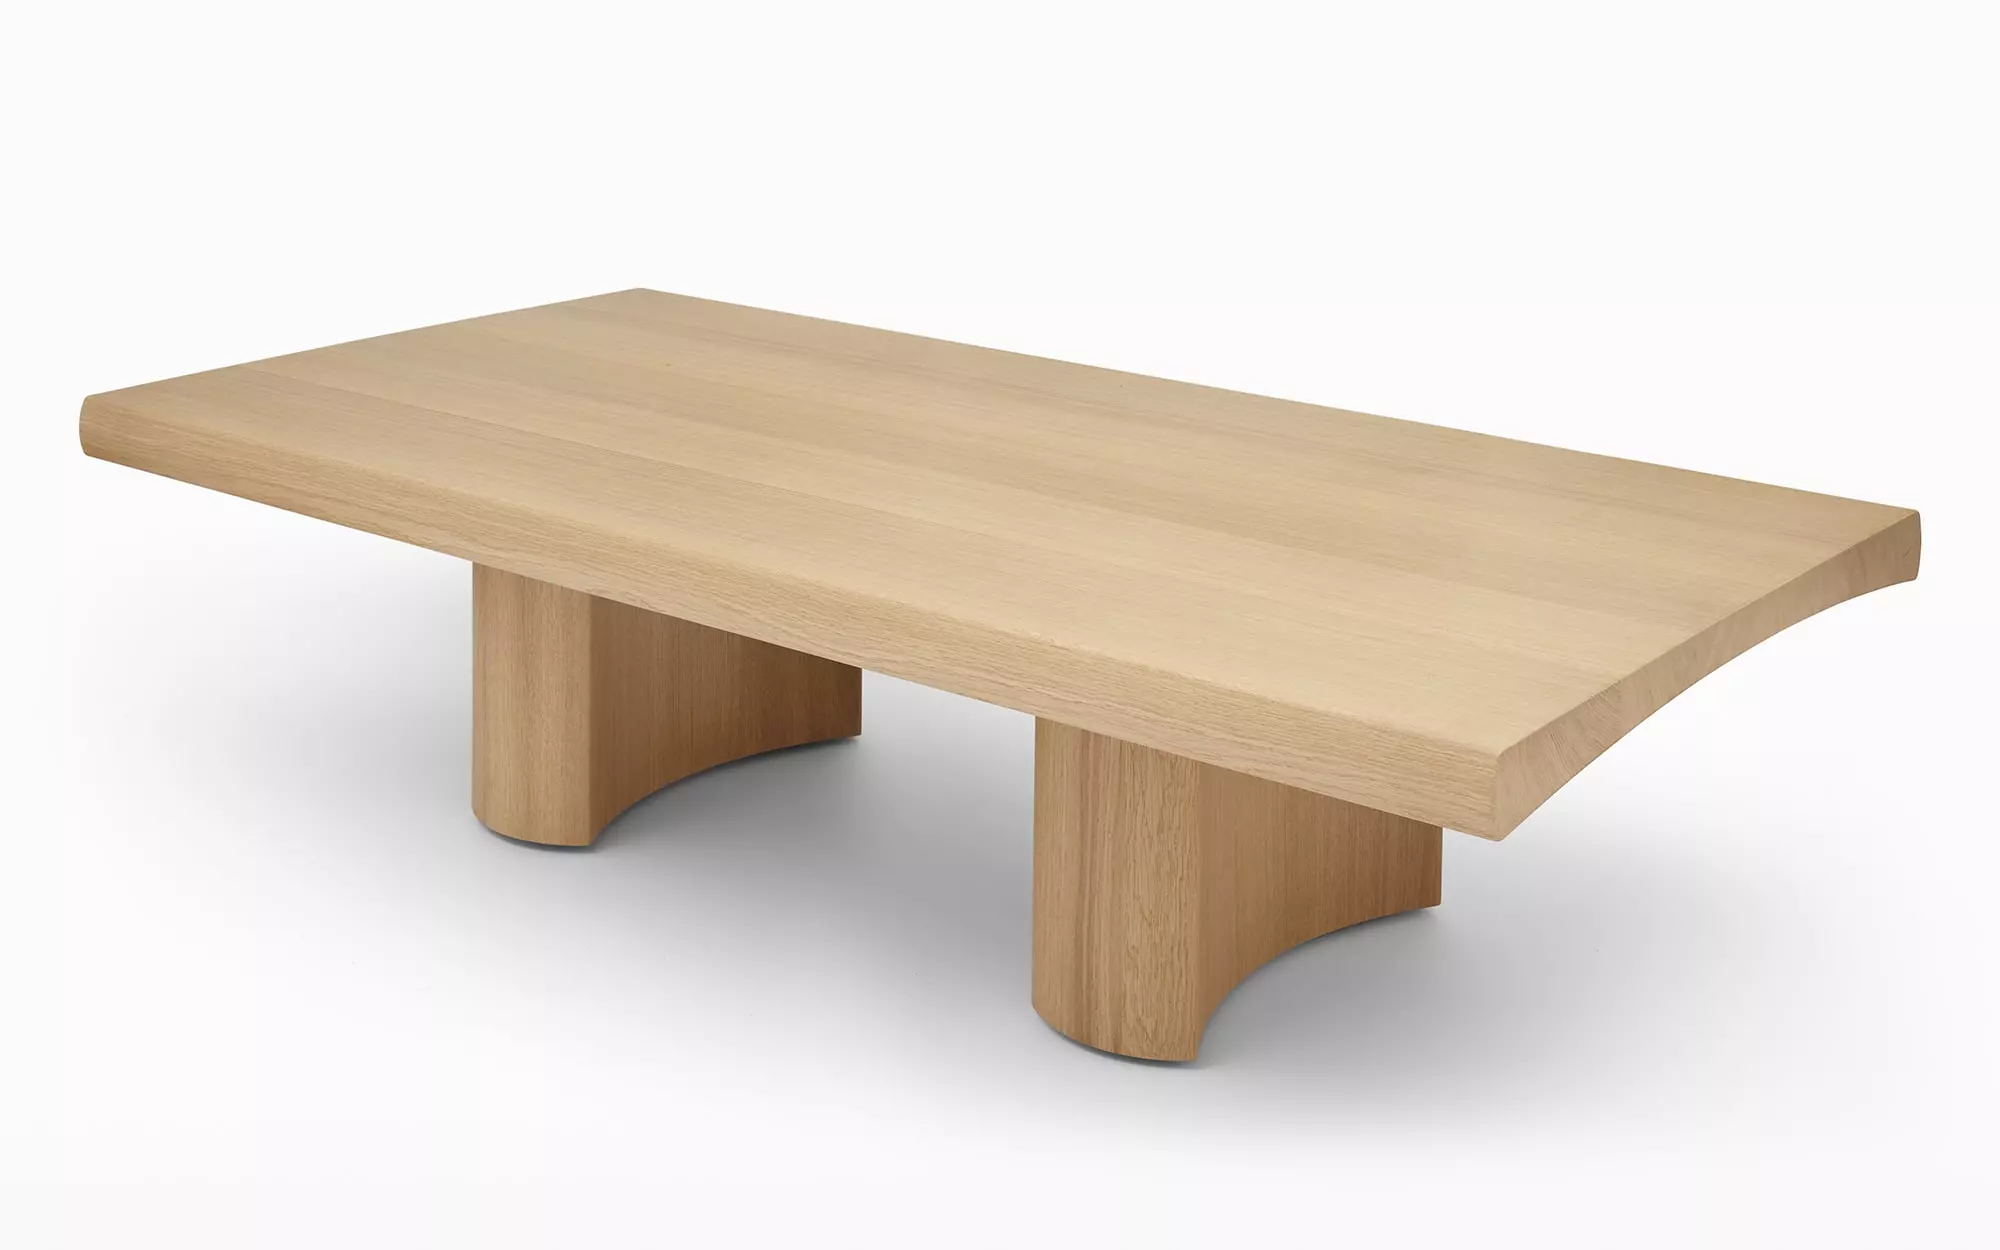 Hakone Coffee table - Edward and Jay Barber and Osgerby - Bench - Galerie kreo